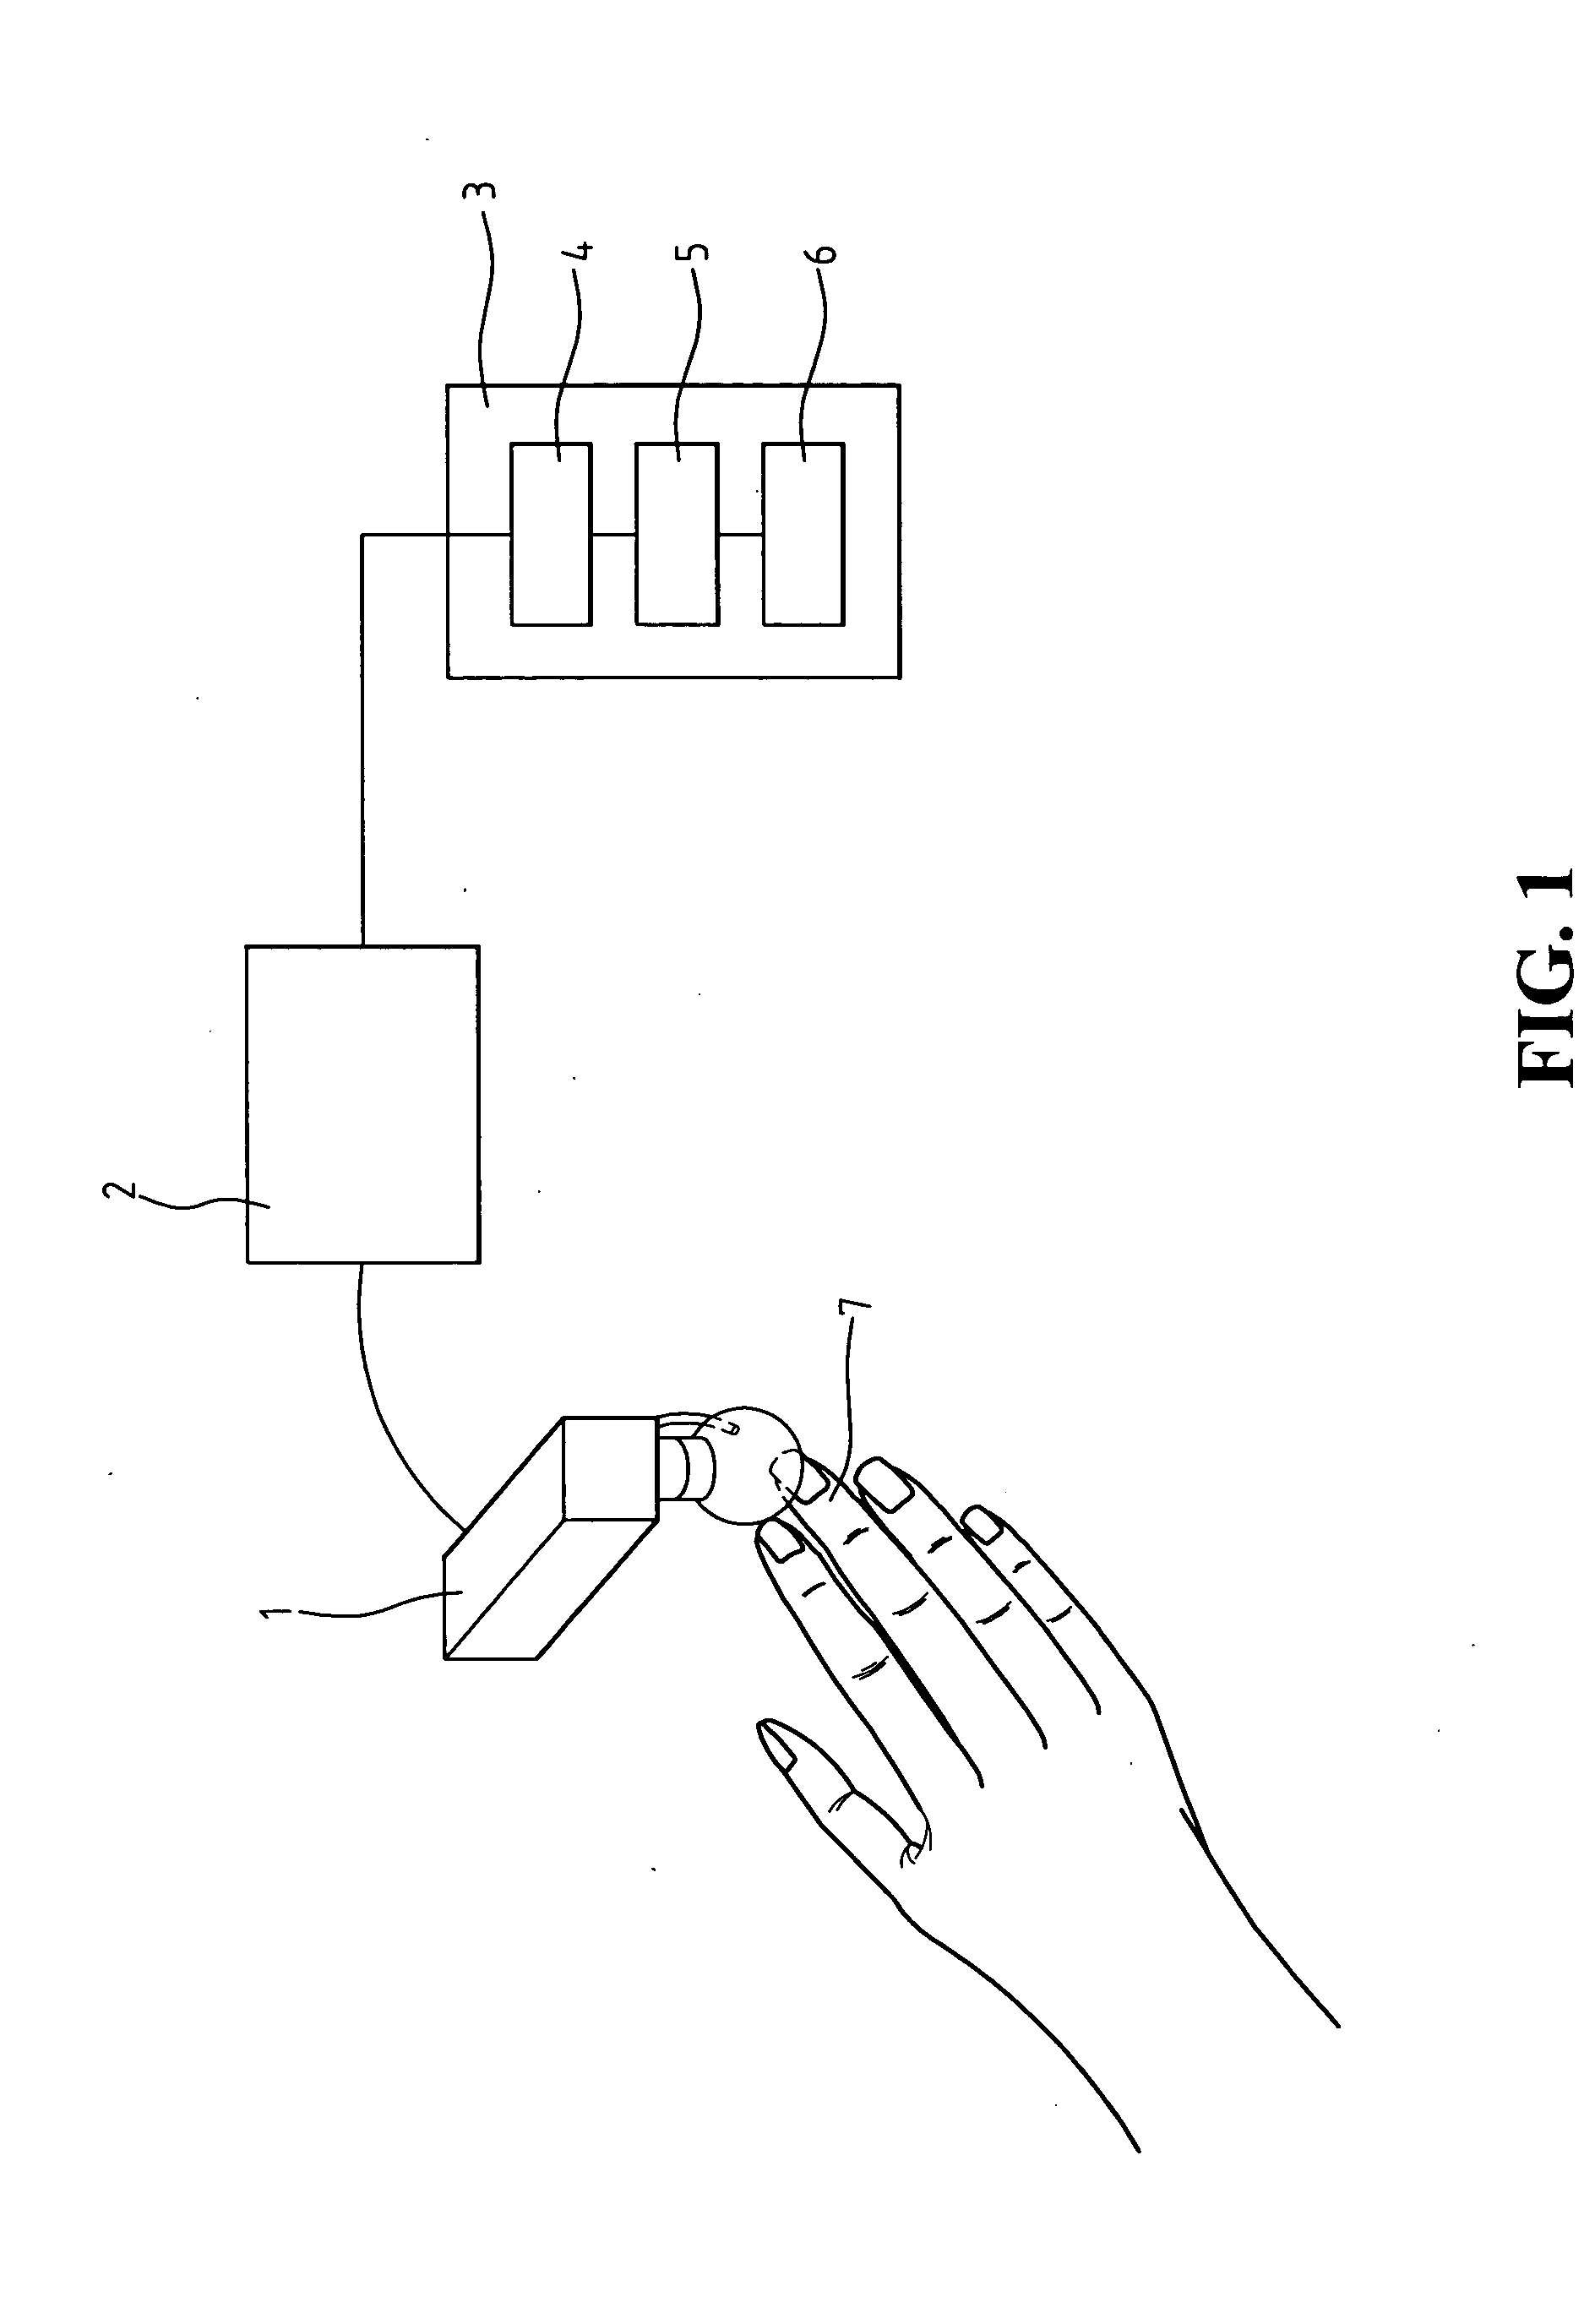 System and method for real-time microcirculation diagnosis